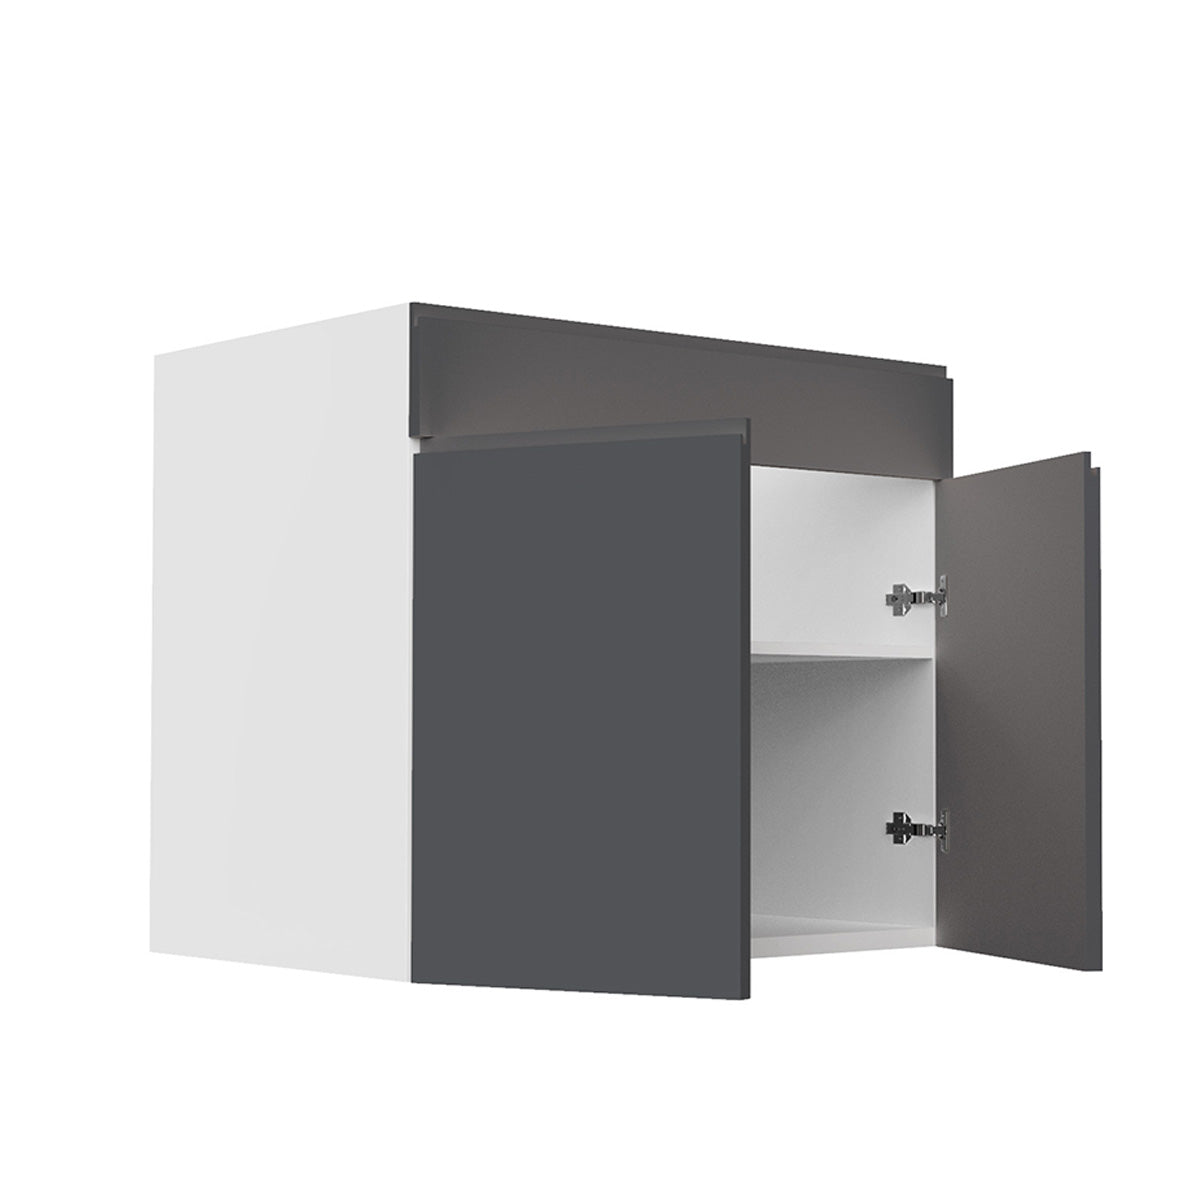 RTA - Lacquer Grey - Sink Base Cabinets | 33"W x 30"H x 23.8"D